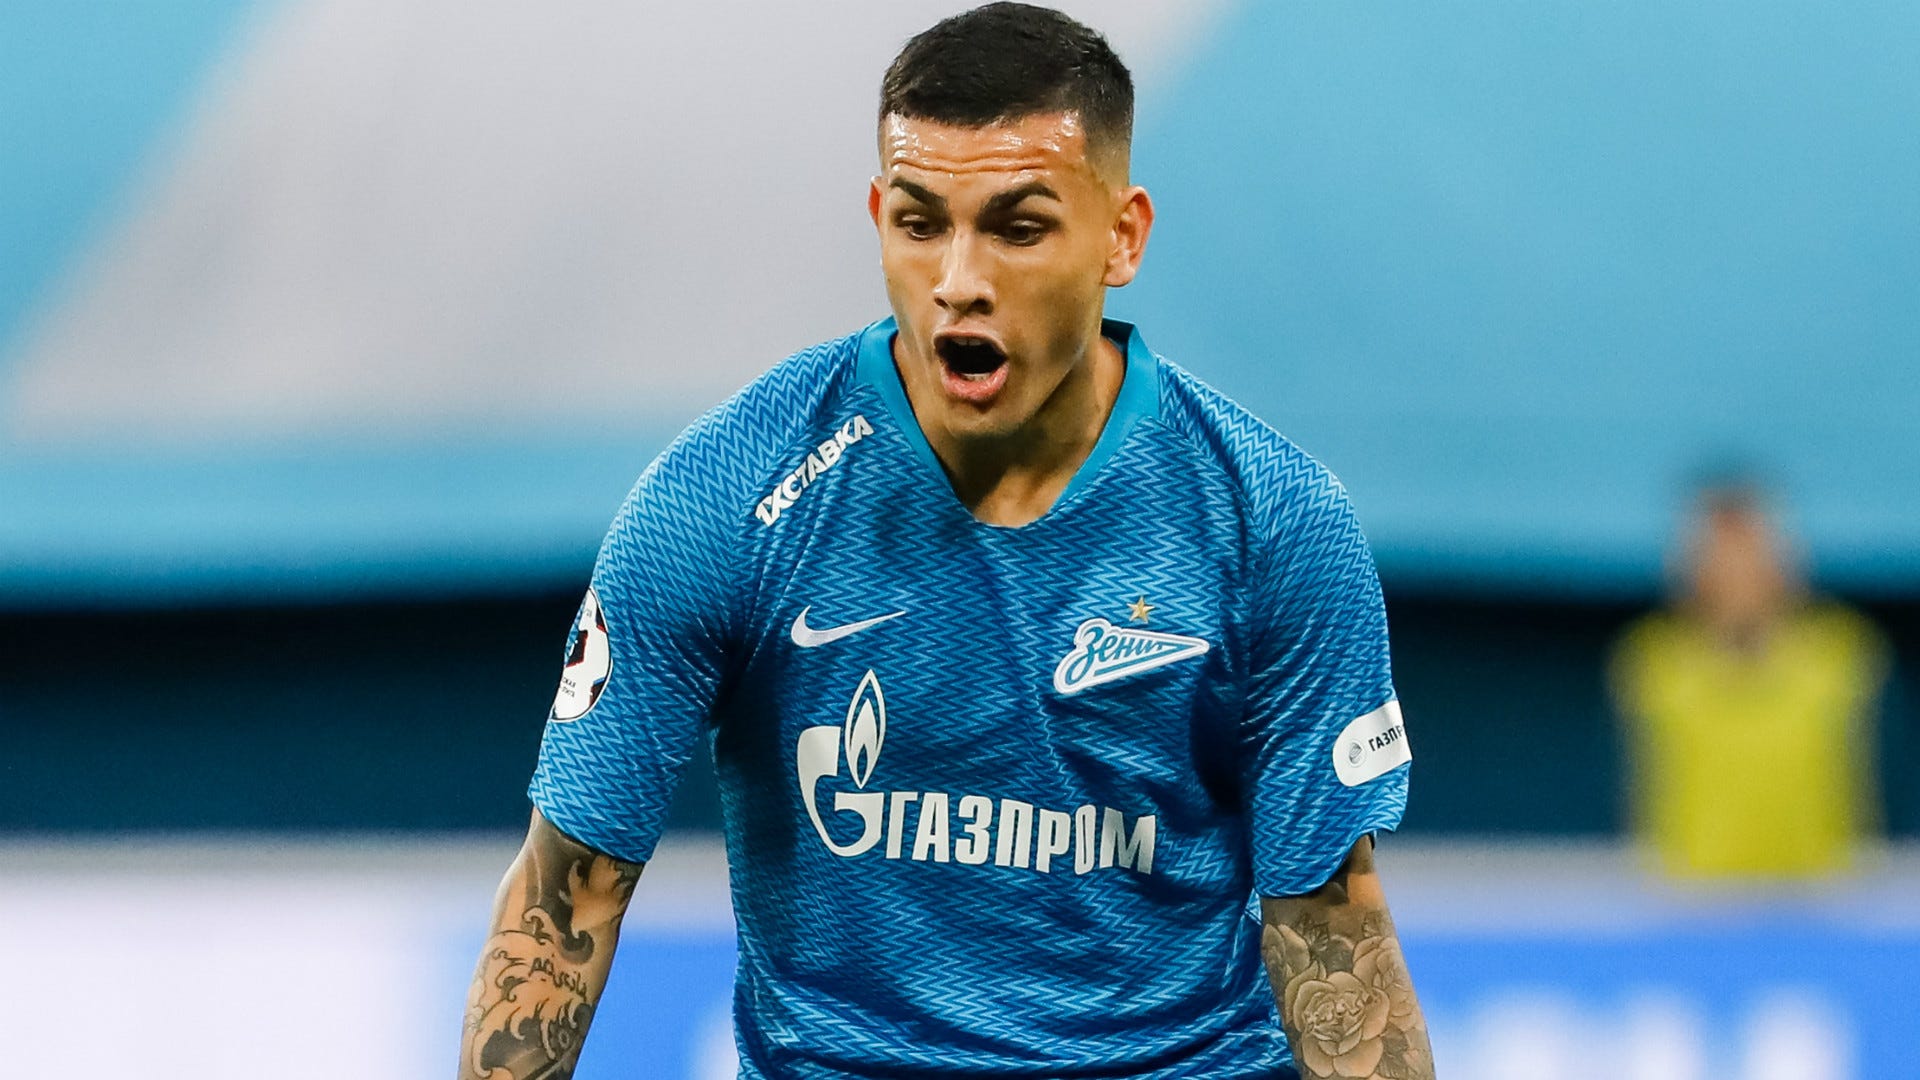 Copa Libertadores: Zenit star Leandro Paredes denies deliberate red card in effort to attend final | Goal.com